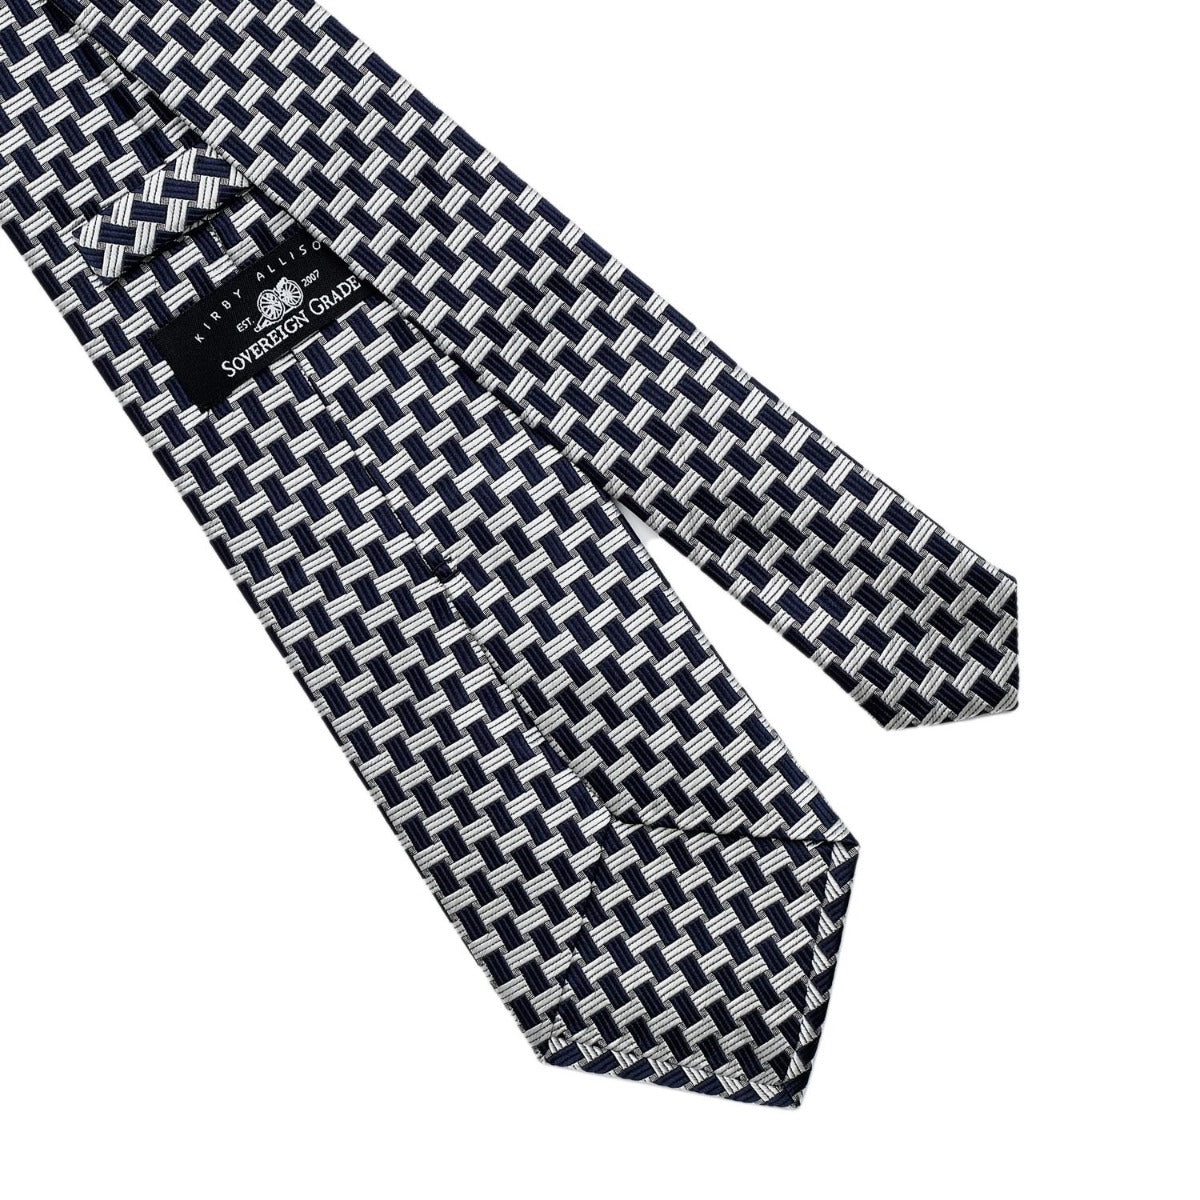 A Sovereign Grade Navy Basket Weave Silk Tie with premium linings on a white background from KirbyAllison.com.